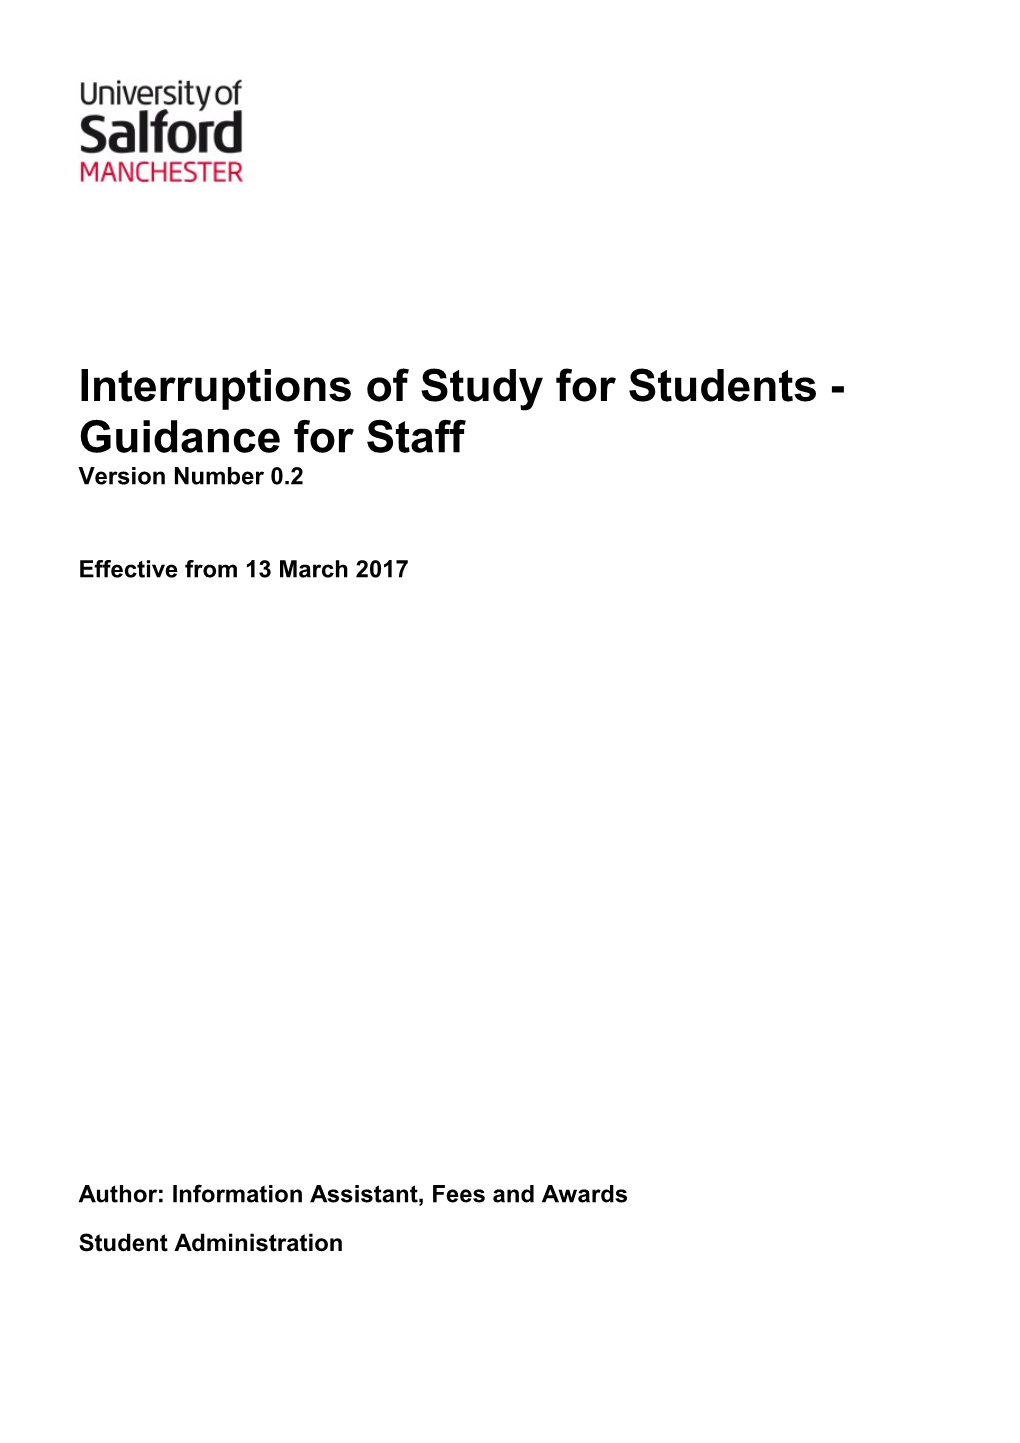 Interruptions of Study for Students - Guidance for Staff